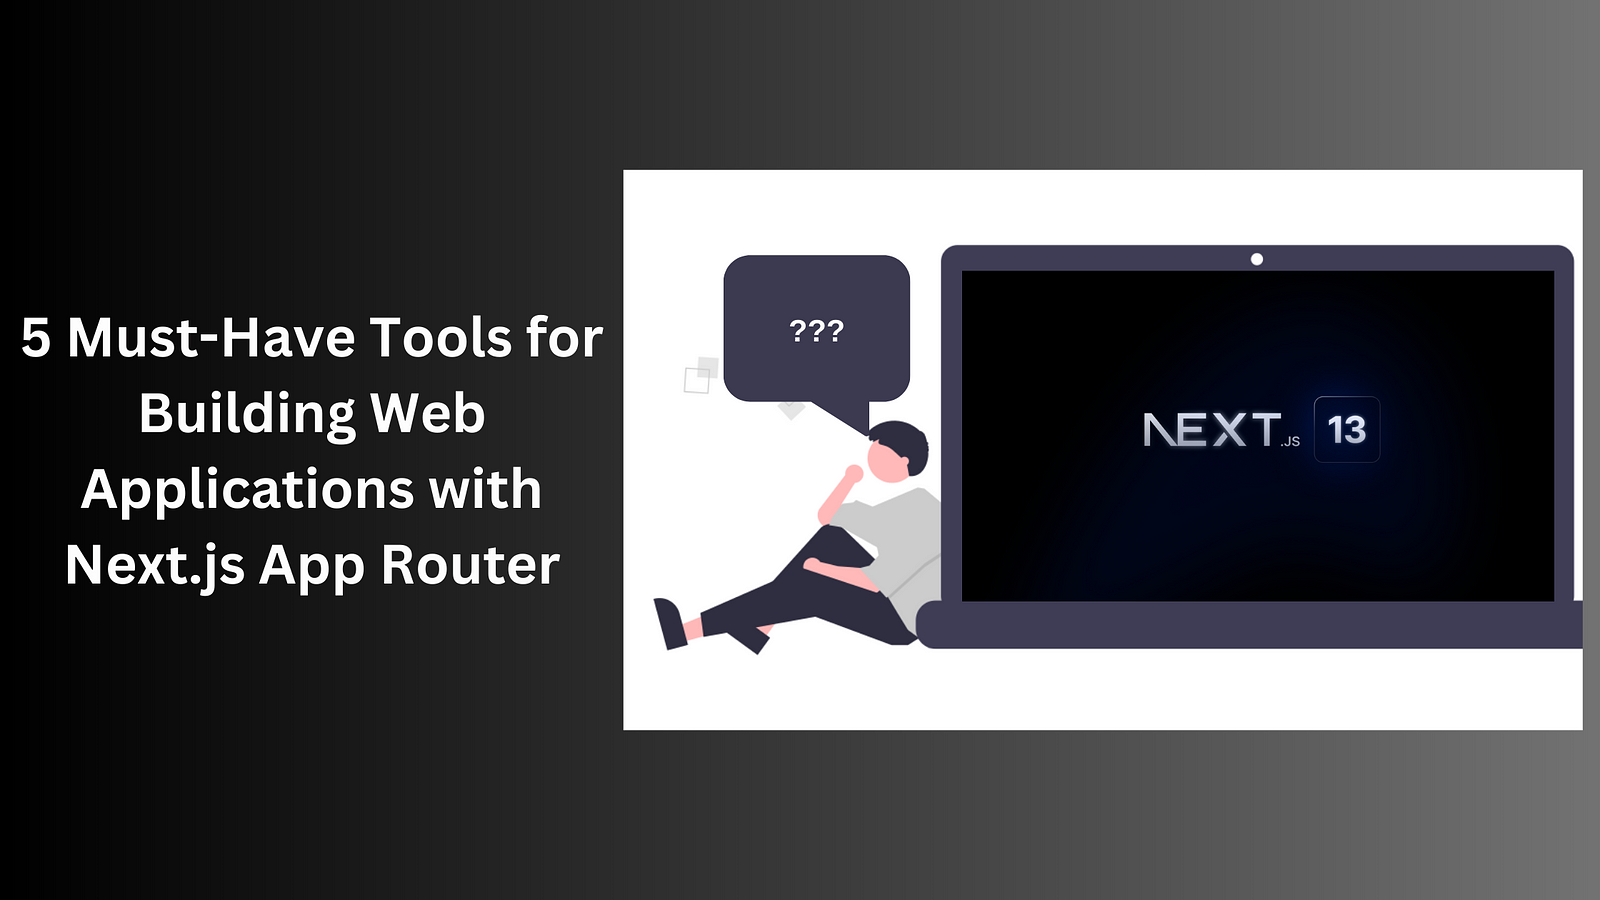 5 Must-Have Tools for Building Web Applications with Next.js App Router